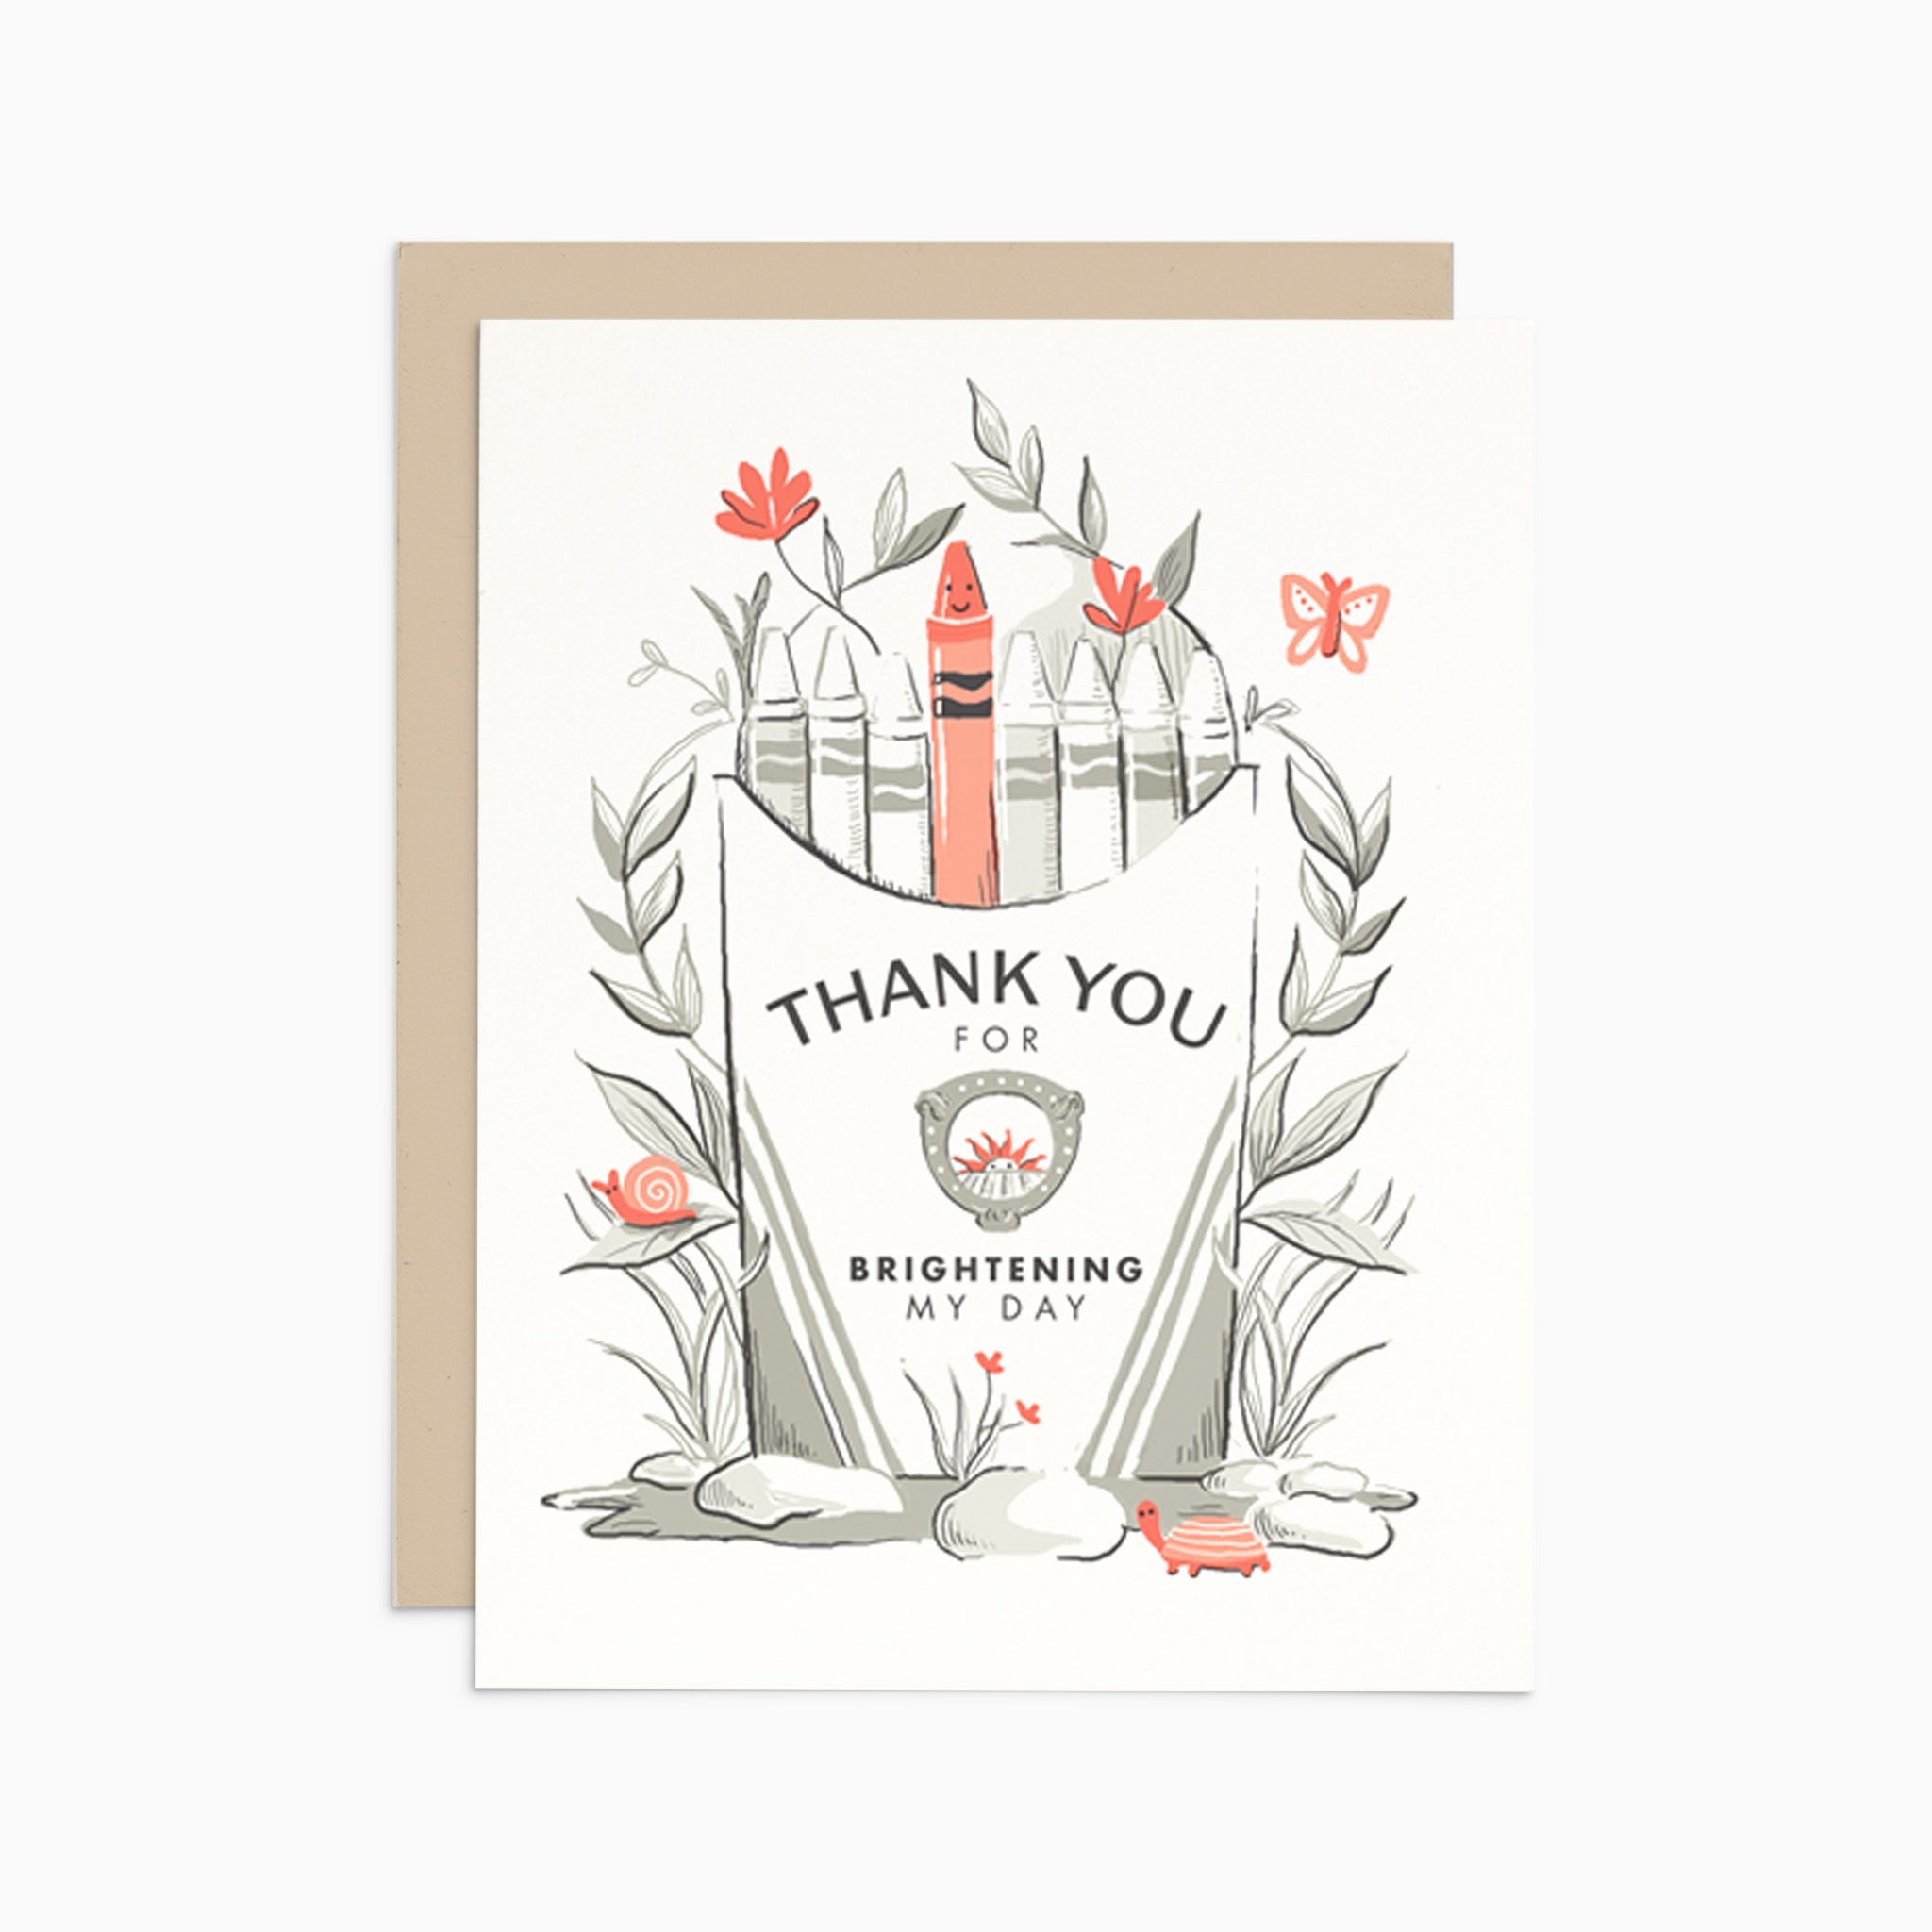 Illustrated Thank You Card featuring a box of crayons with one bright crayon and whimsical florals, displayed on a neutral background. Perfect for expressing heartfelt gratitude.